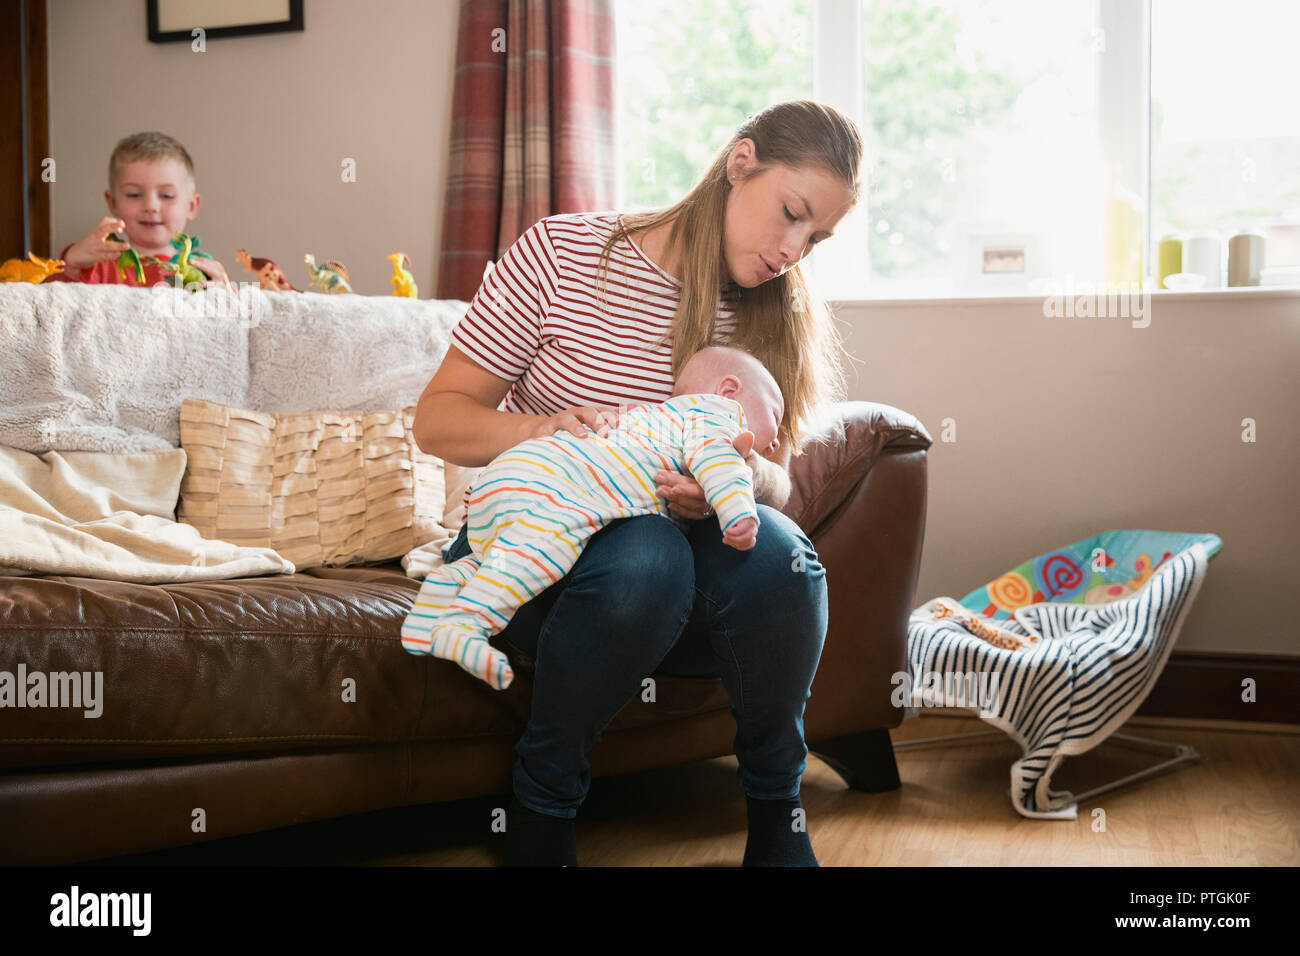 Mother sitting on the edge of the sofa in the living room and burping her newborn child after feeding him. Her other son is stadning behind the sofa p Stock Photo